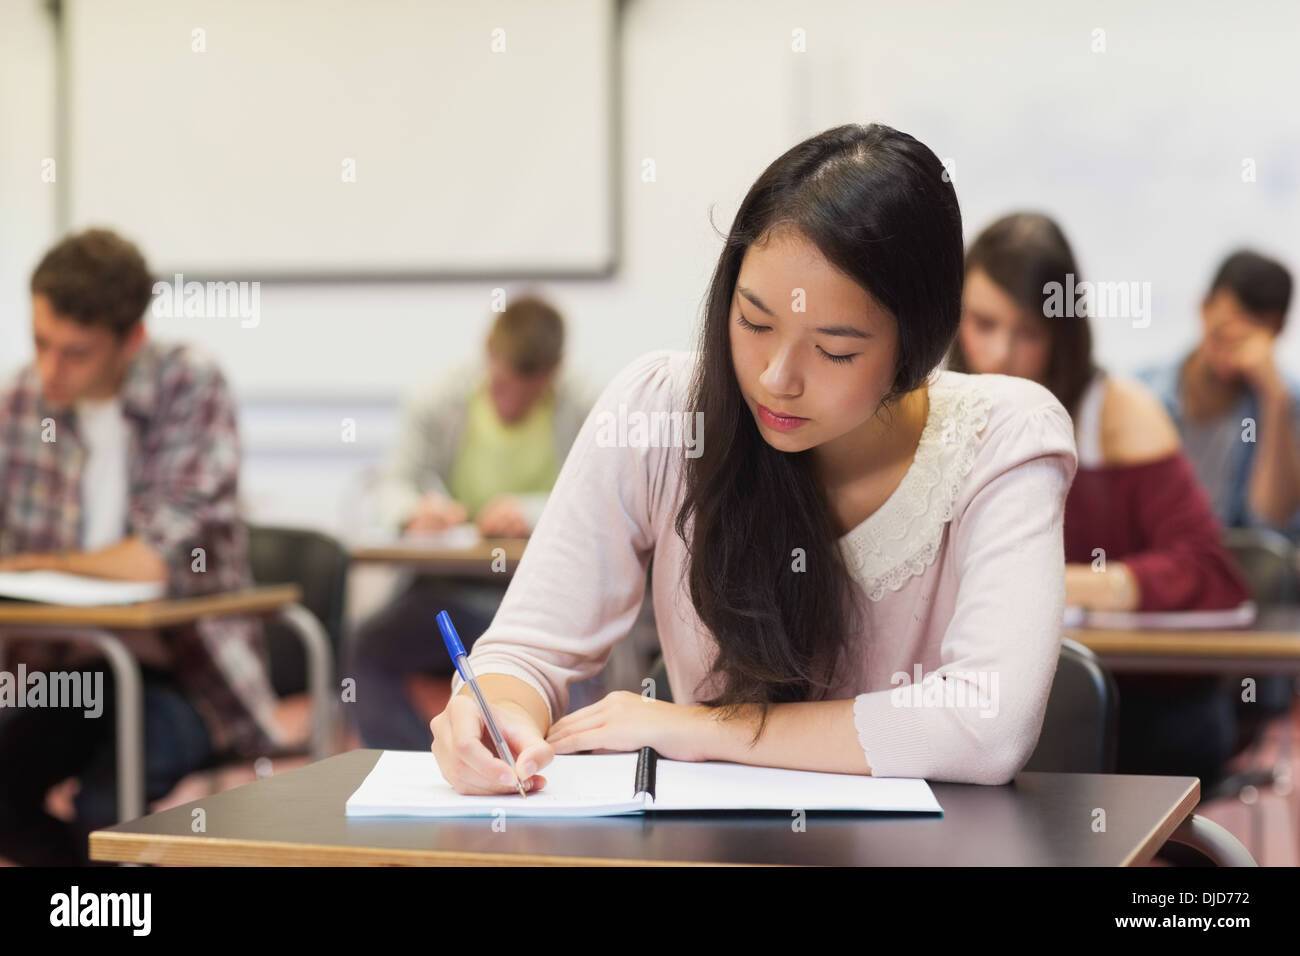 Focused asian student taking notes in class Stock Photo